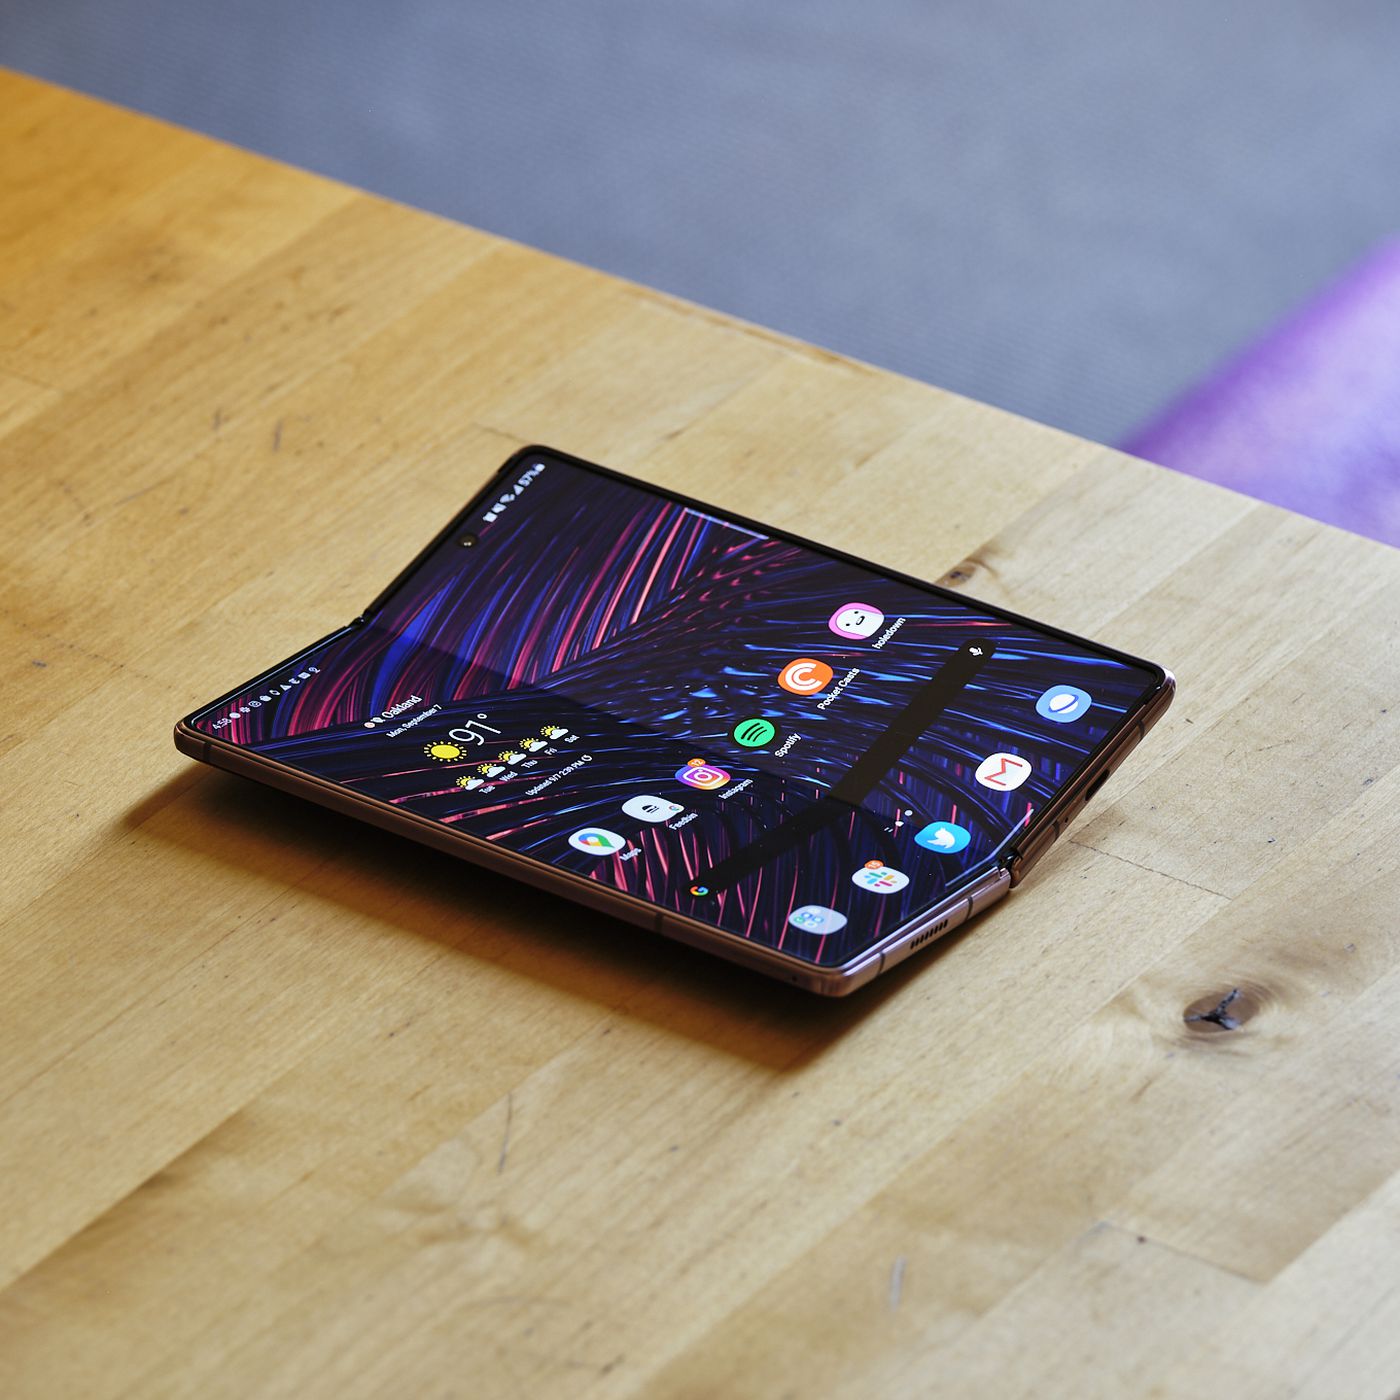 Affirmed: some Samsung Galaxy Z Fold 2 pre-orders have been postponed